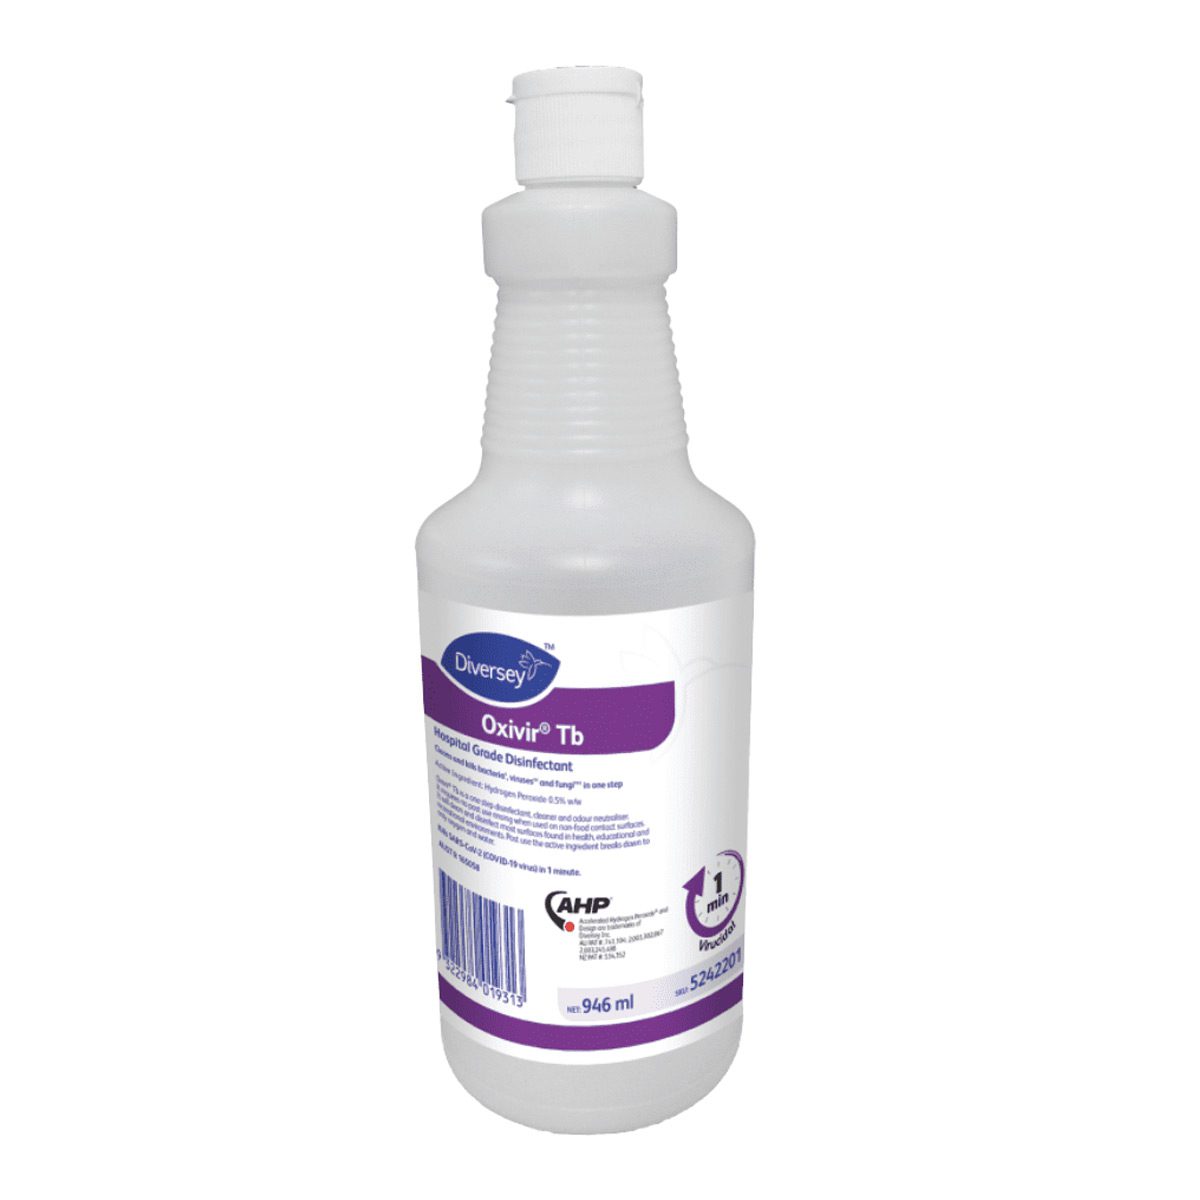 cleaning-products-disinfectants-and-sanitisers-diversey-oxivir-TB-946ml-hospital-grade-disinfectant-one-step-disinfectant-cleaner-and-odour-neutraliser-ready-to-use-formula-vjs-distributors-4277285